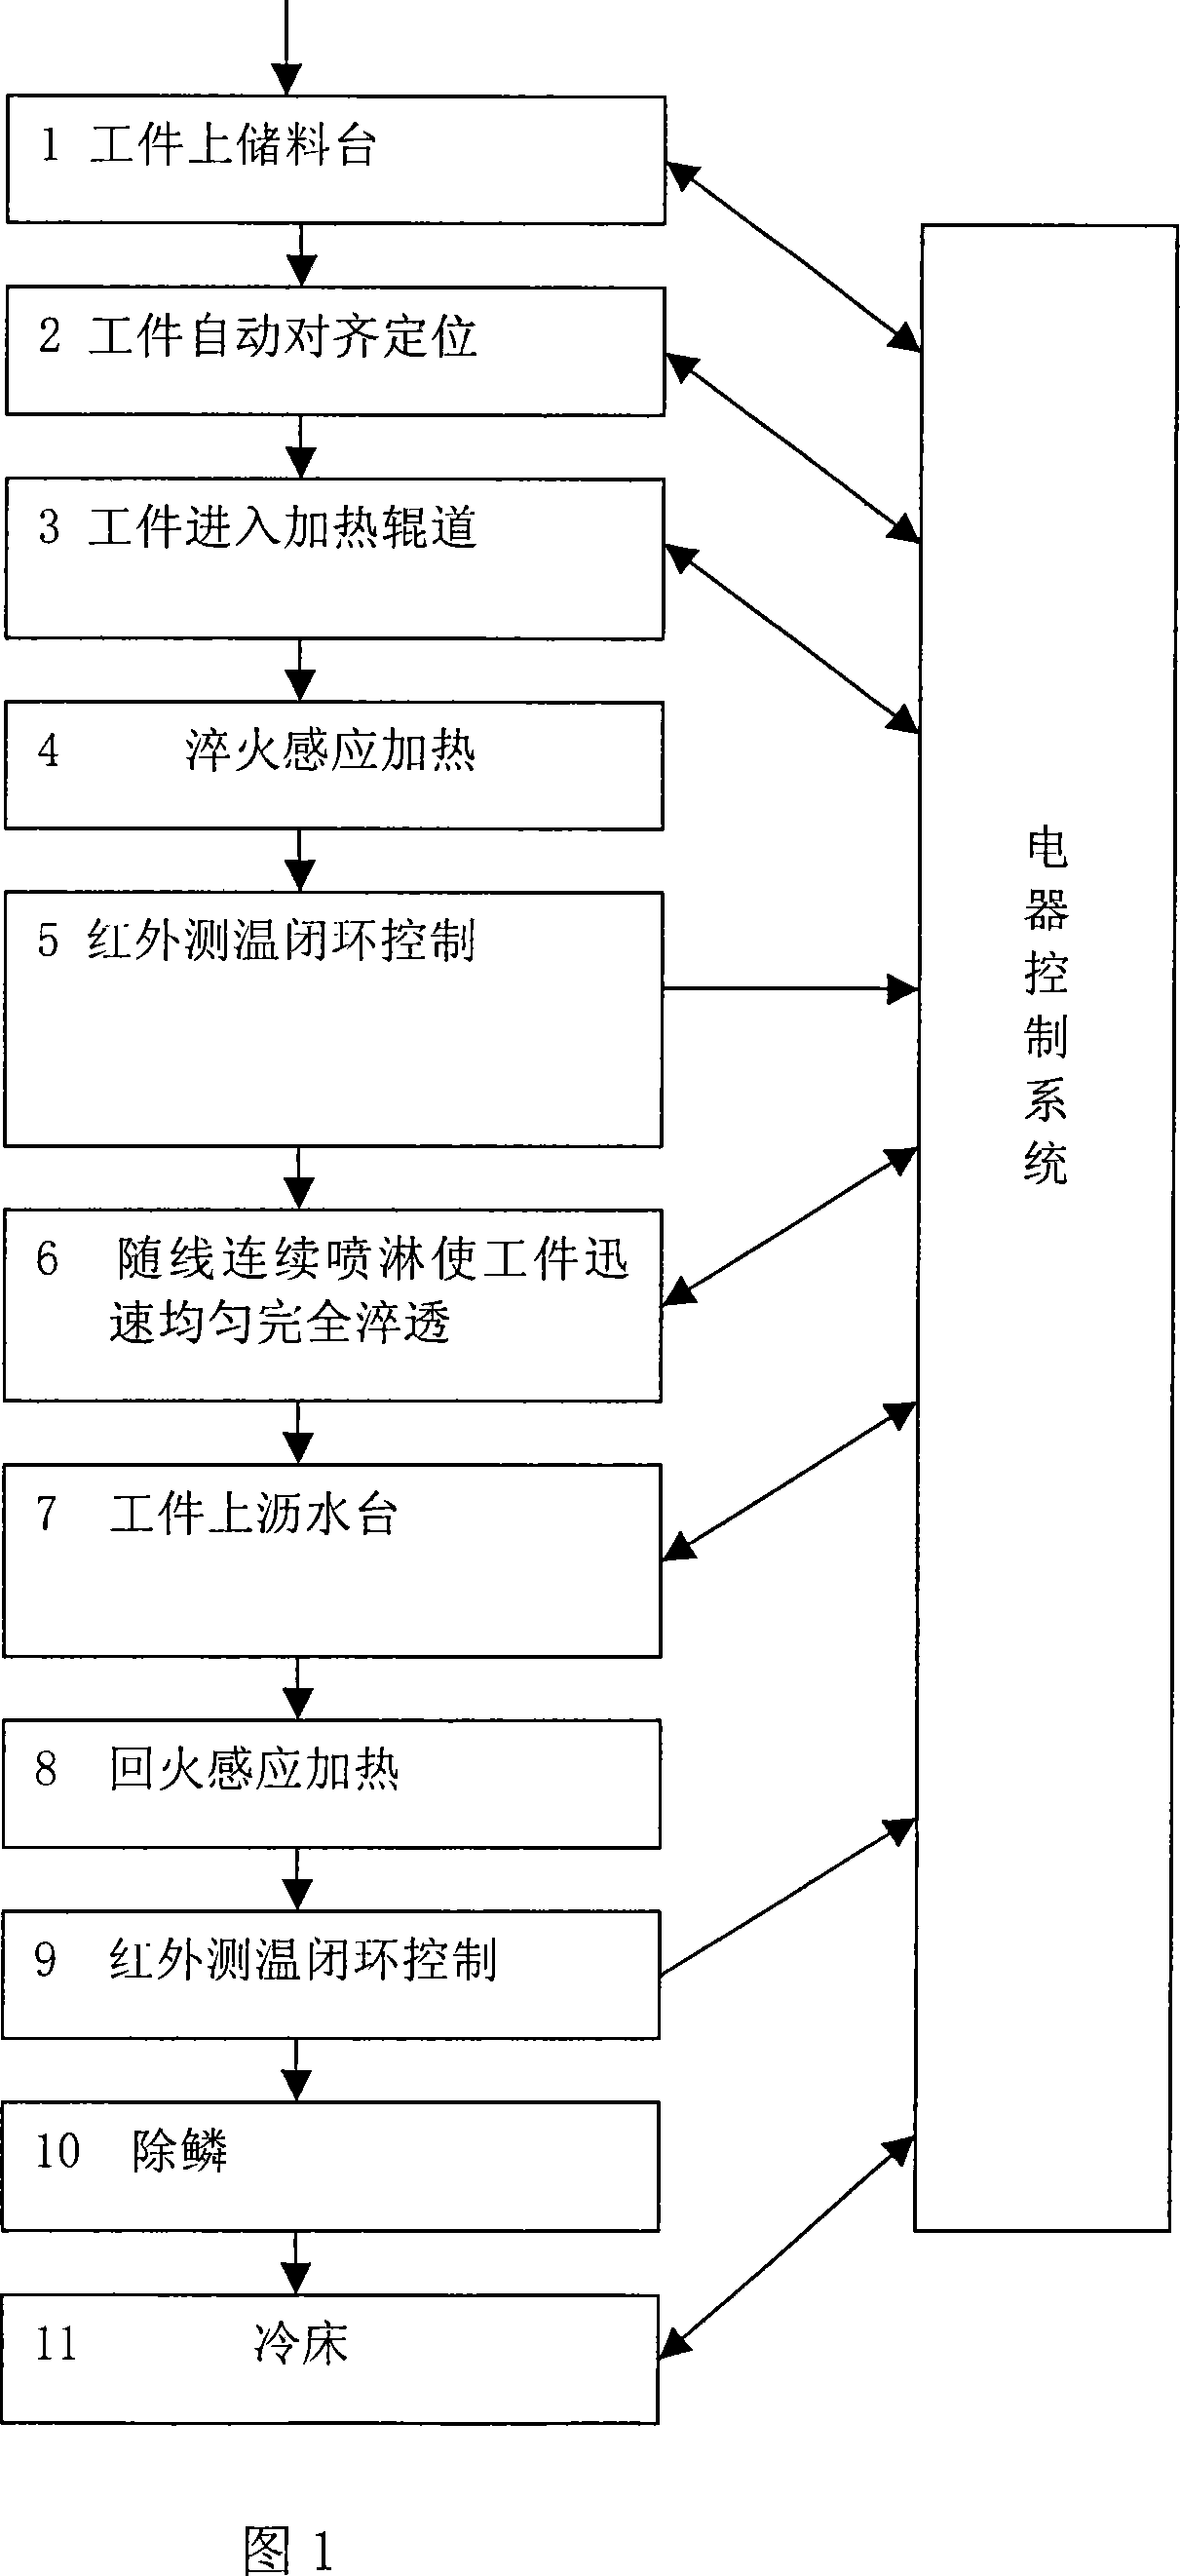 Medium frequency induction heating treatment method for steel pipe, petroleum well pipe and drill pipe